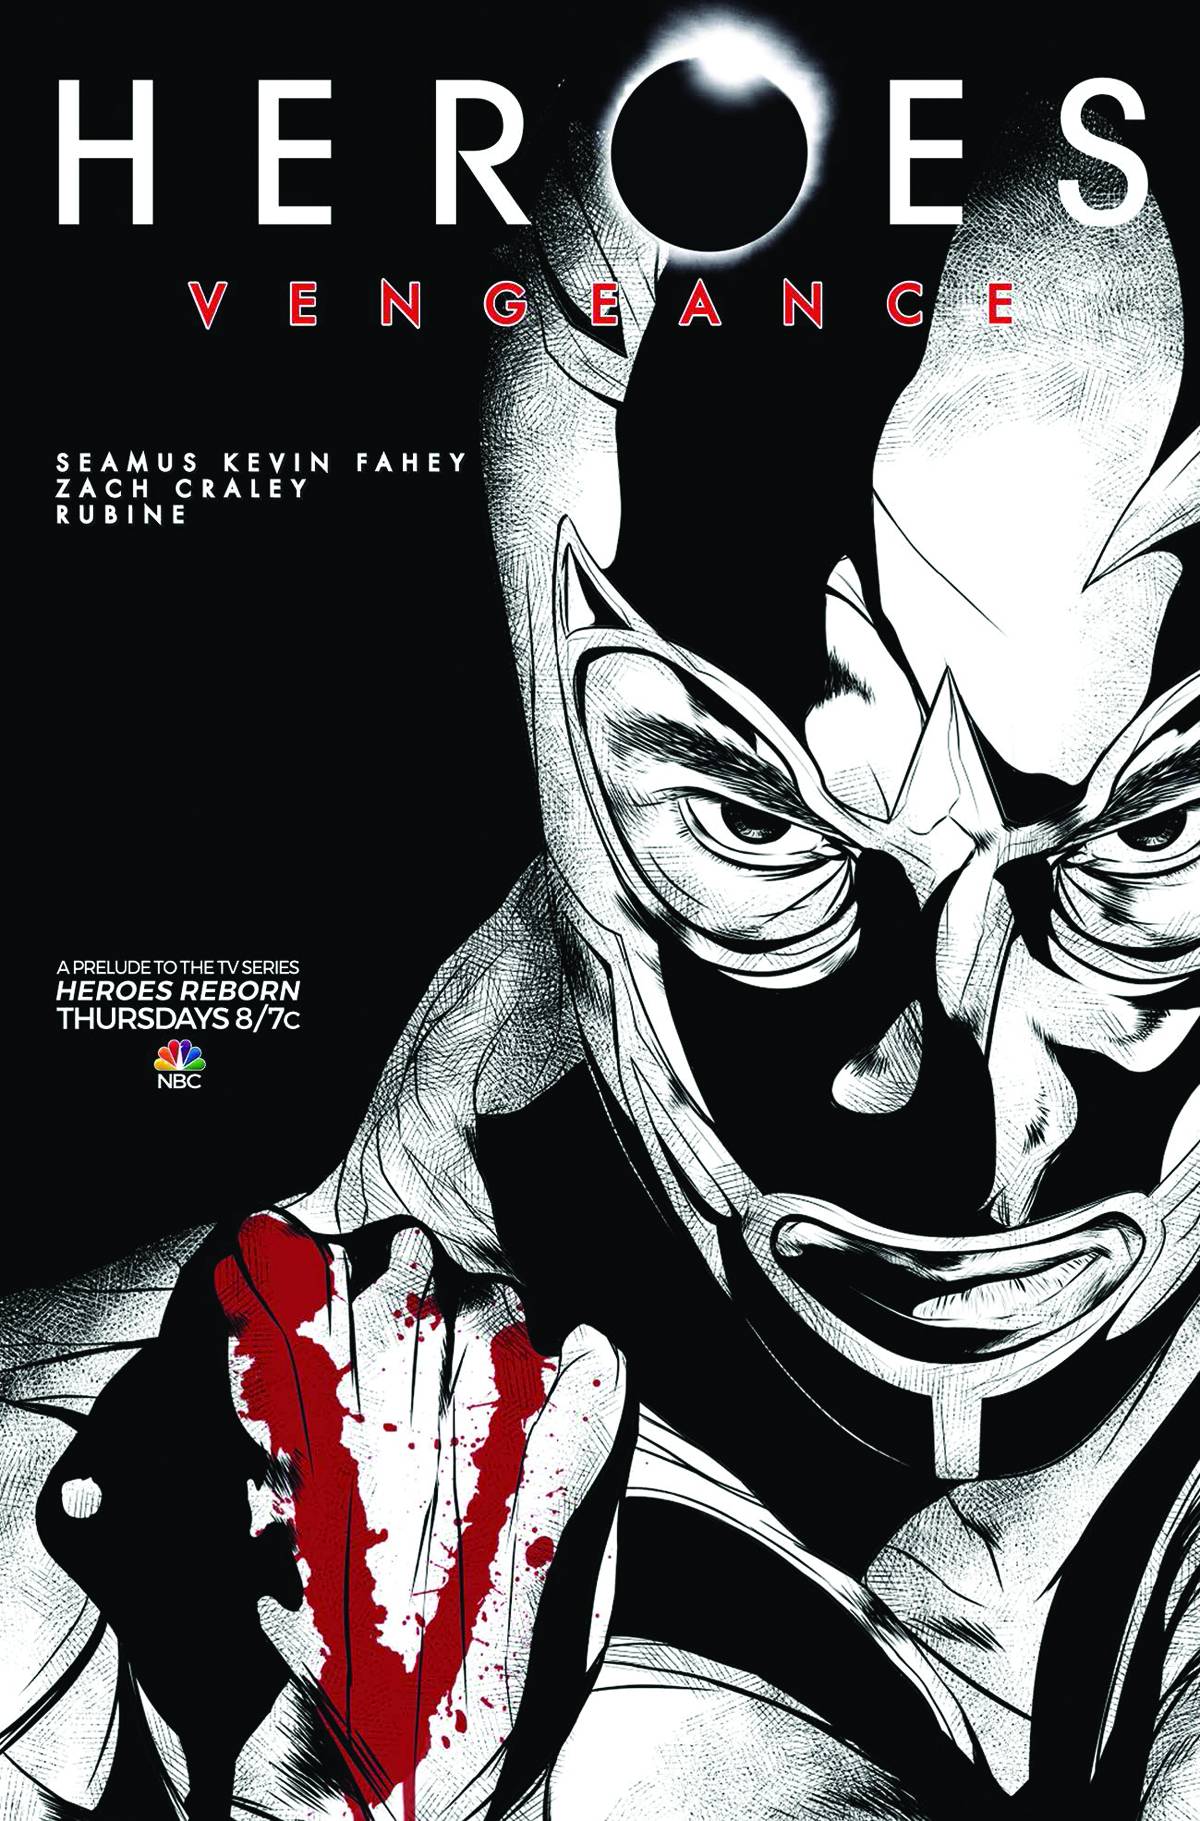 Heroes Vengeance #2 Subscription